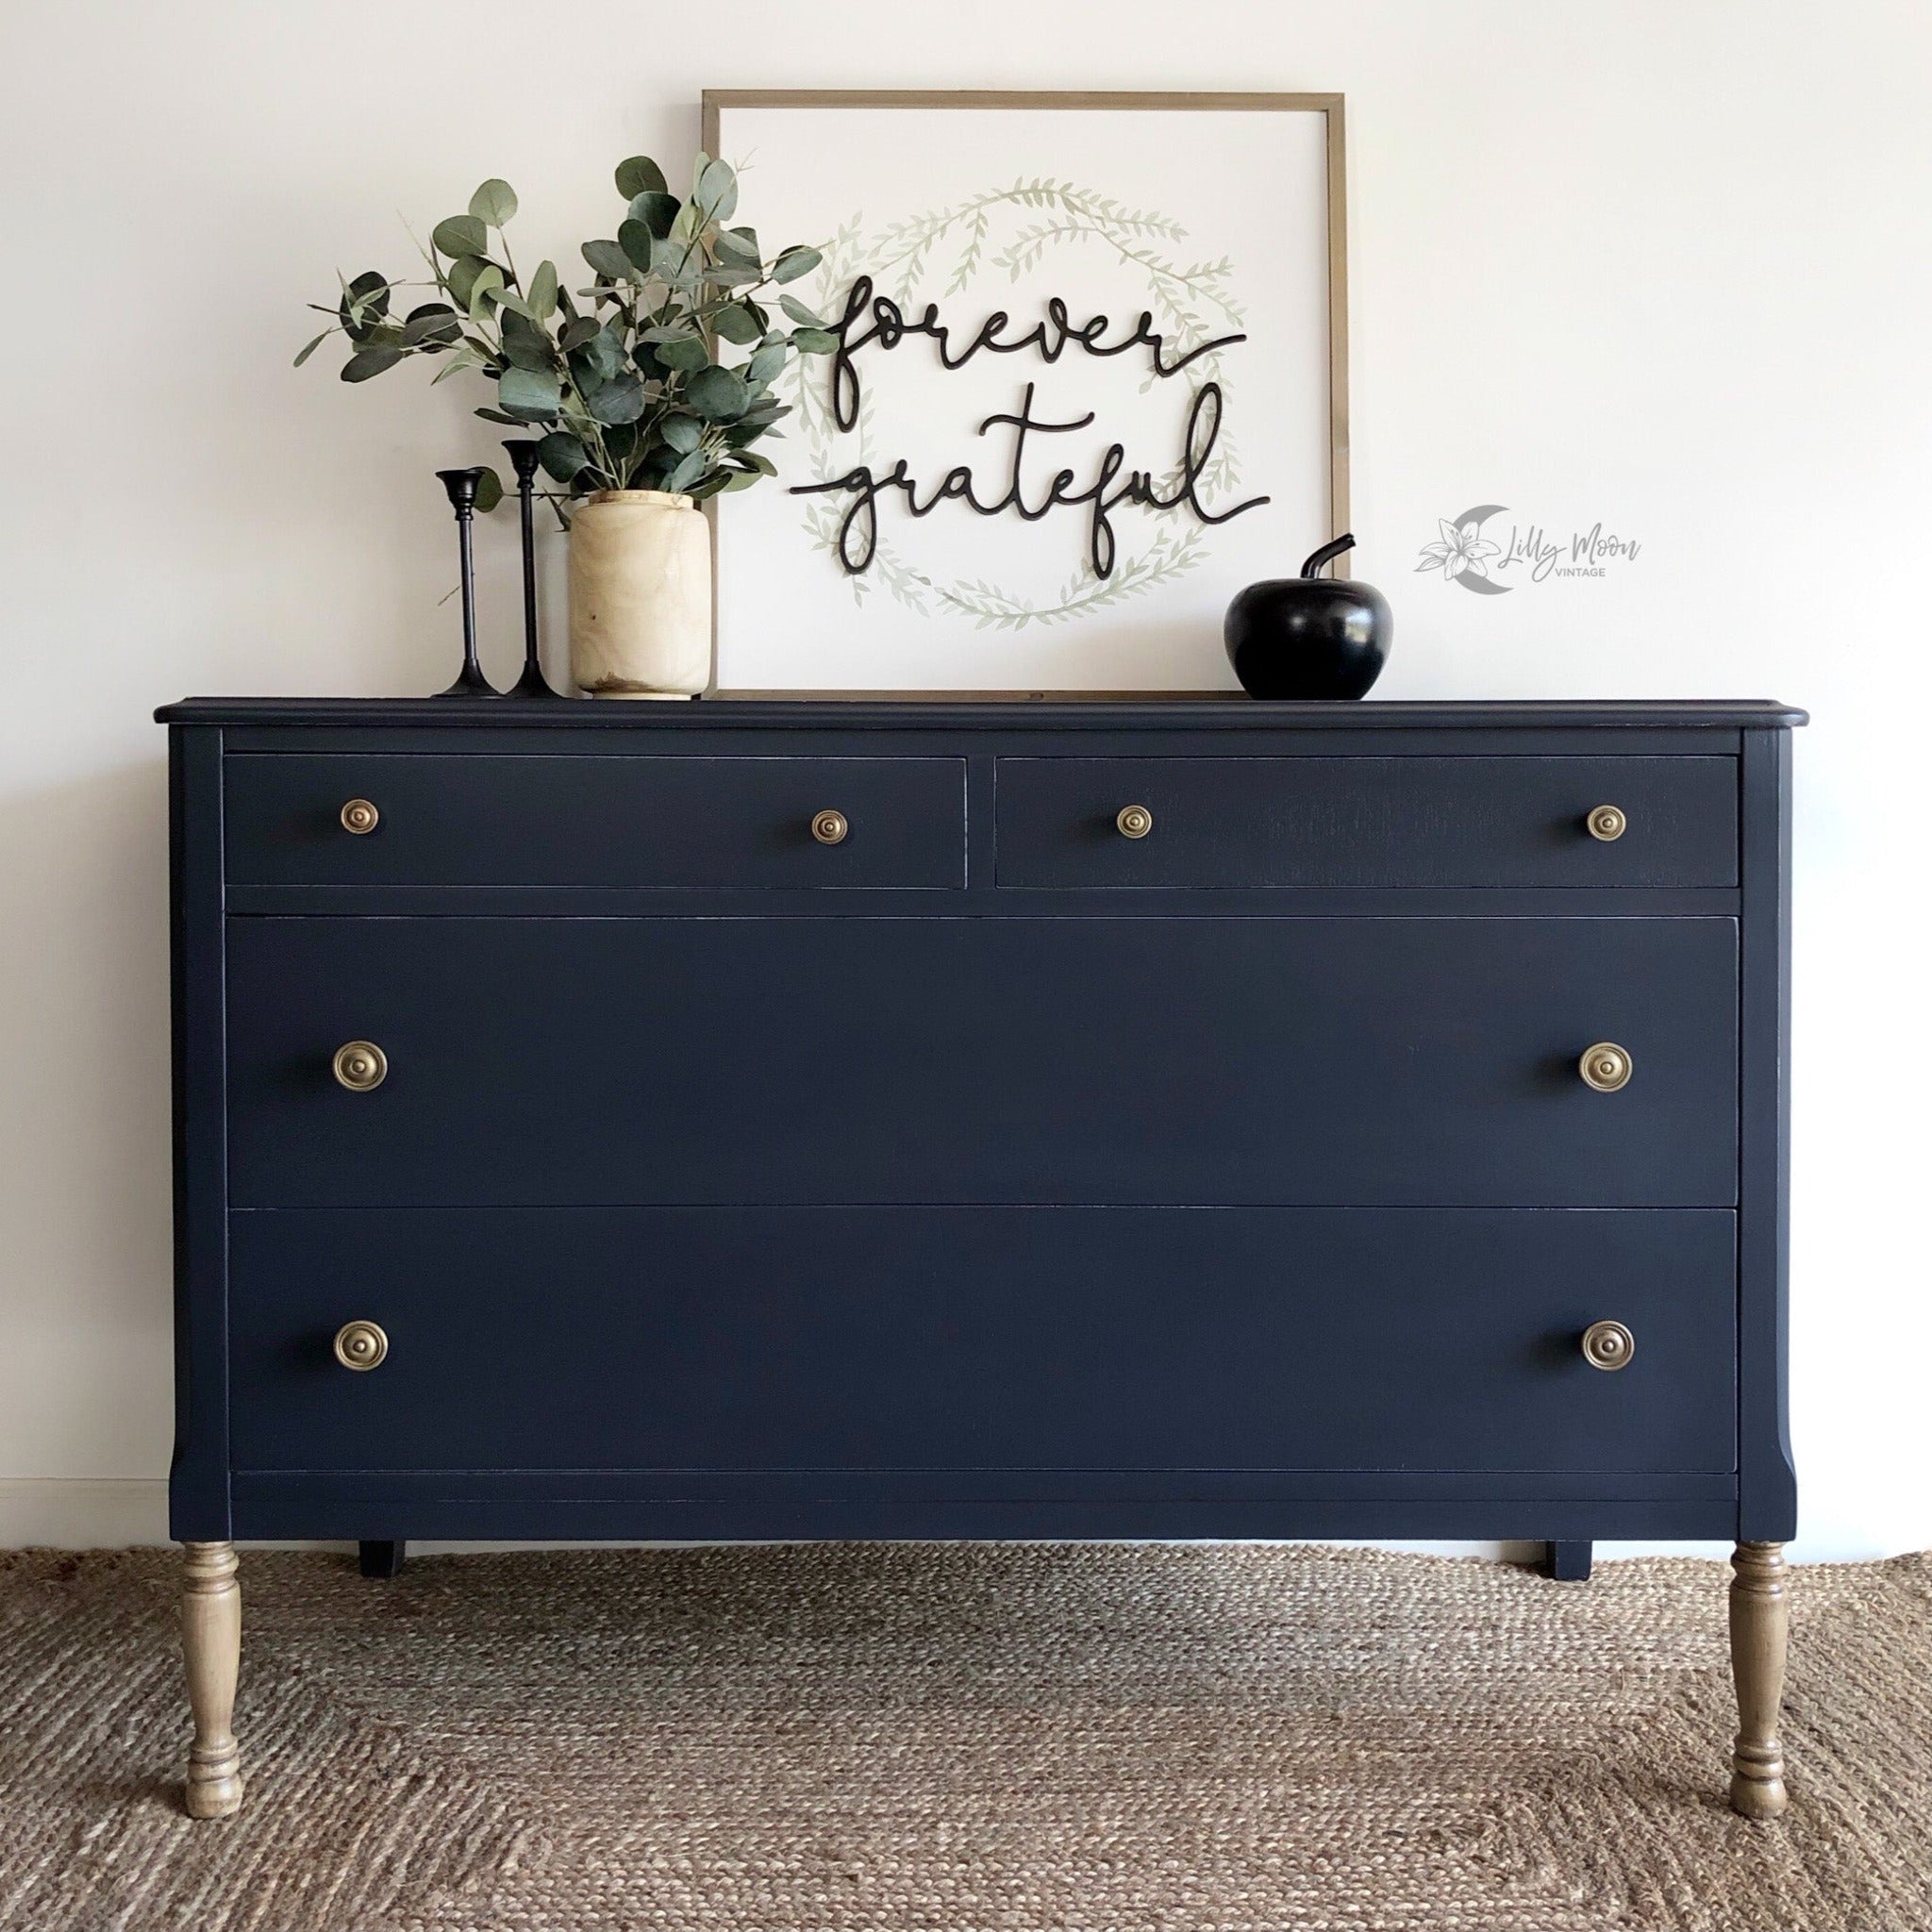 A 4-drawer chest dresser refurbished by Lilly Moon Vintage is painted in Dixie Belle's In the Navy chalk mineral paint.